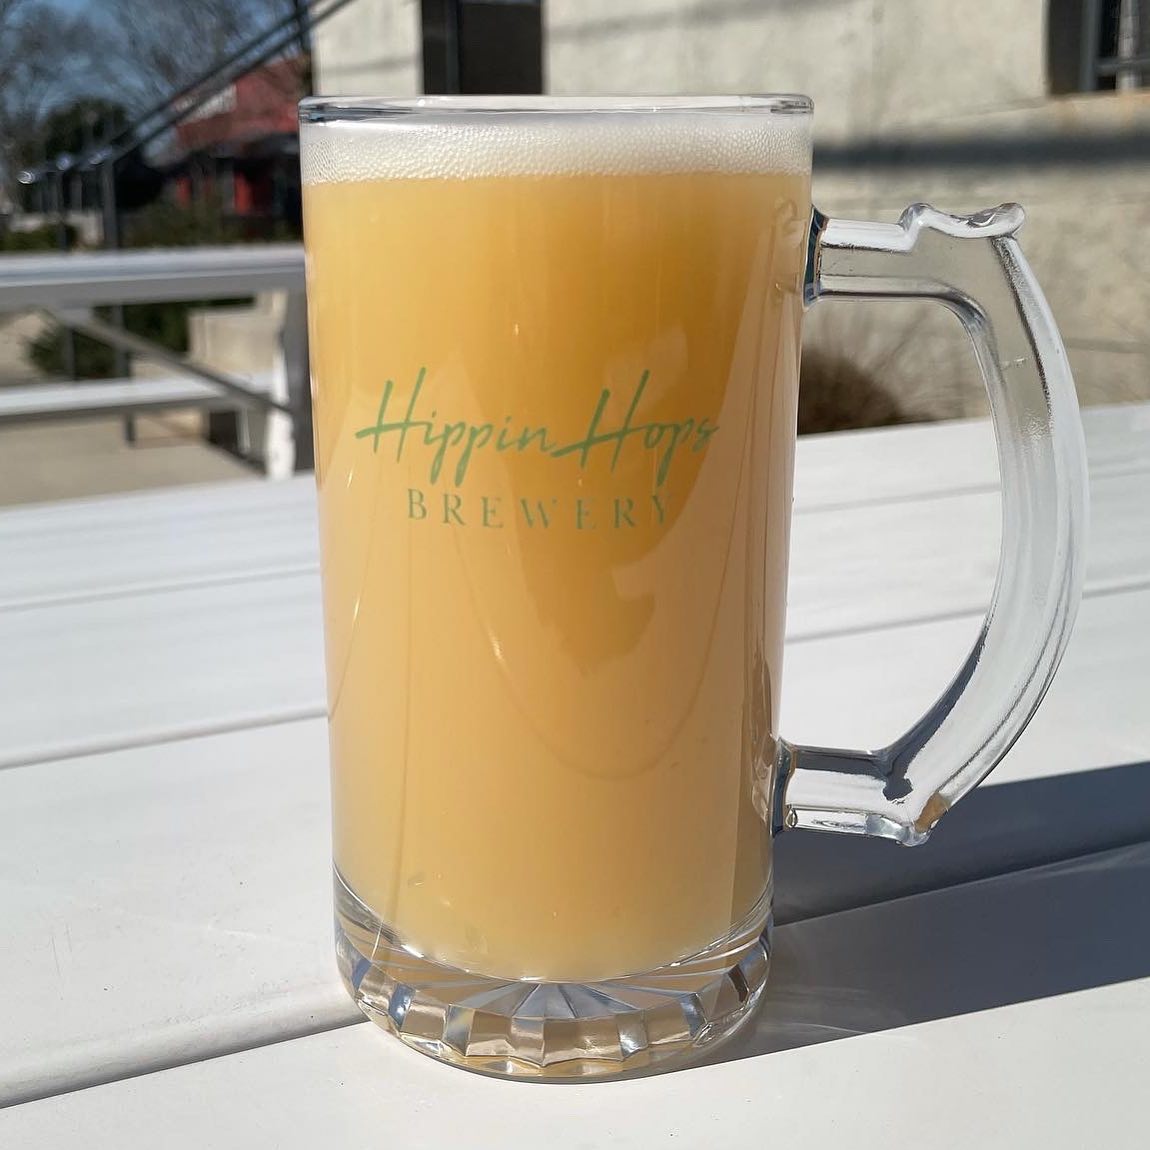 Hippin Hops Brewery